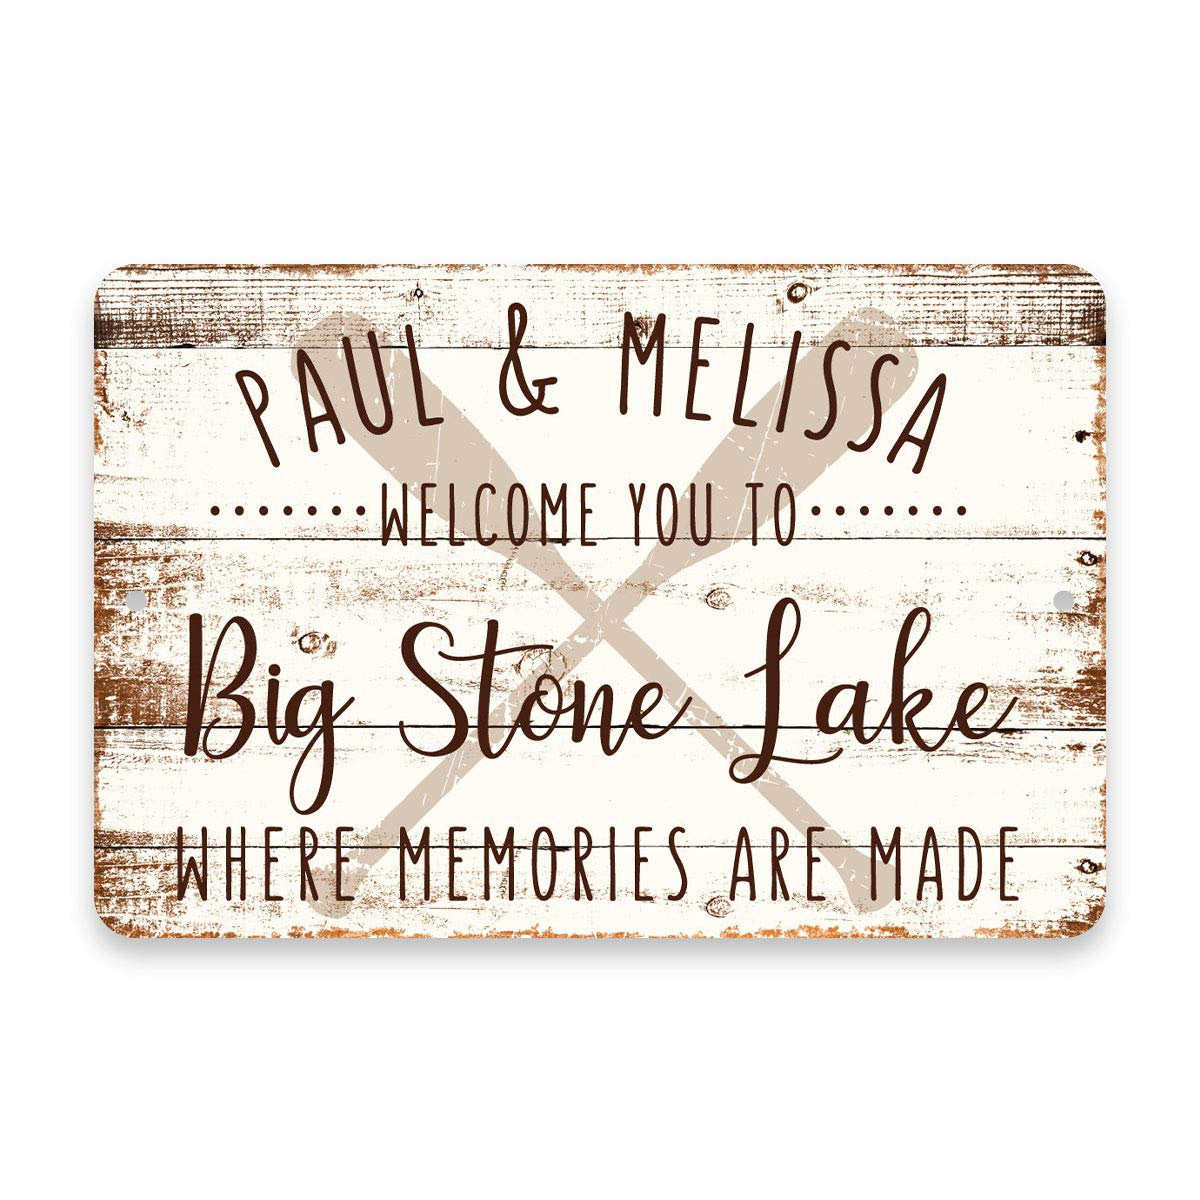 Personalized Welcome to Big Stone Lake Where Memories are Made Sign - 8 X 12 Metal Sign with Wood Look